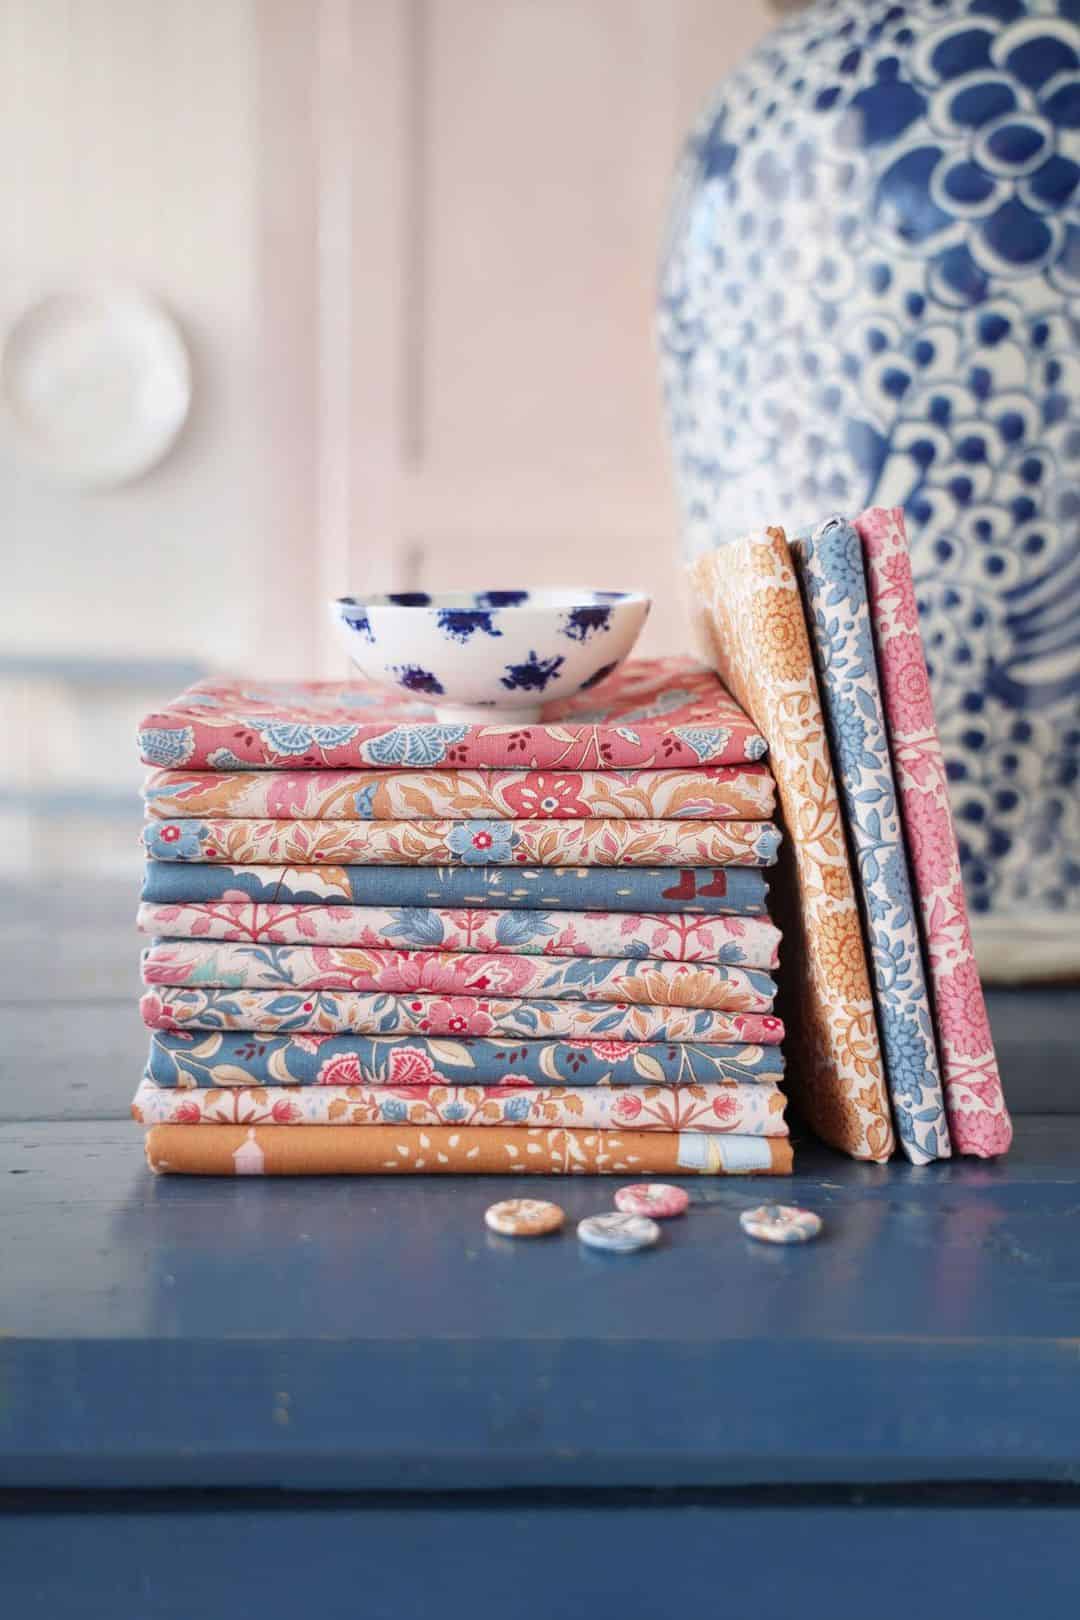 tilda fabrics windy days new collection of designs for autumn 2021 - just one of the beautiful collection of materials by Tilda that we love and have shared all the links you need to buy them and get sewing! #tilda #fabrics #windydays #tildafabrics